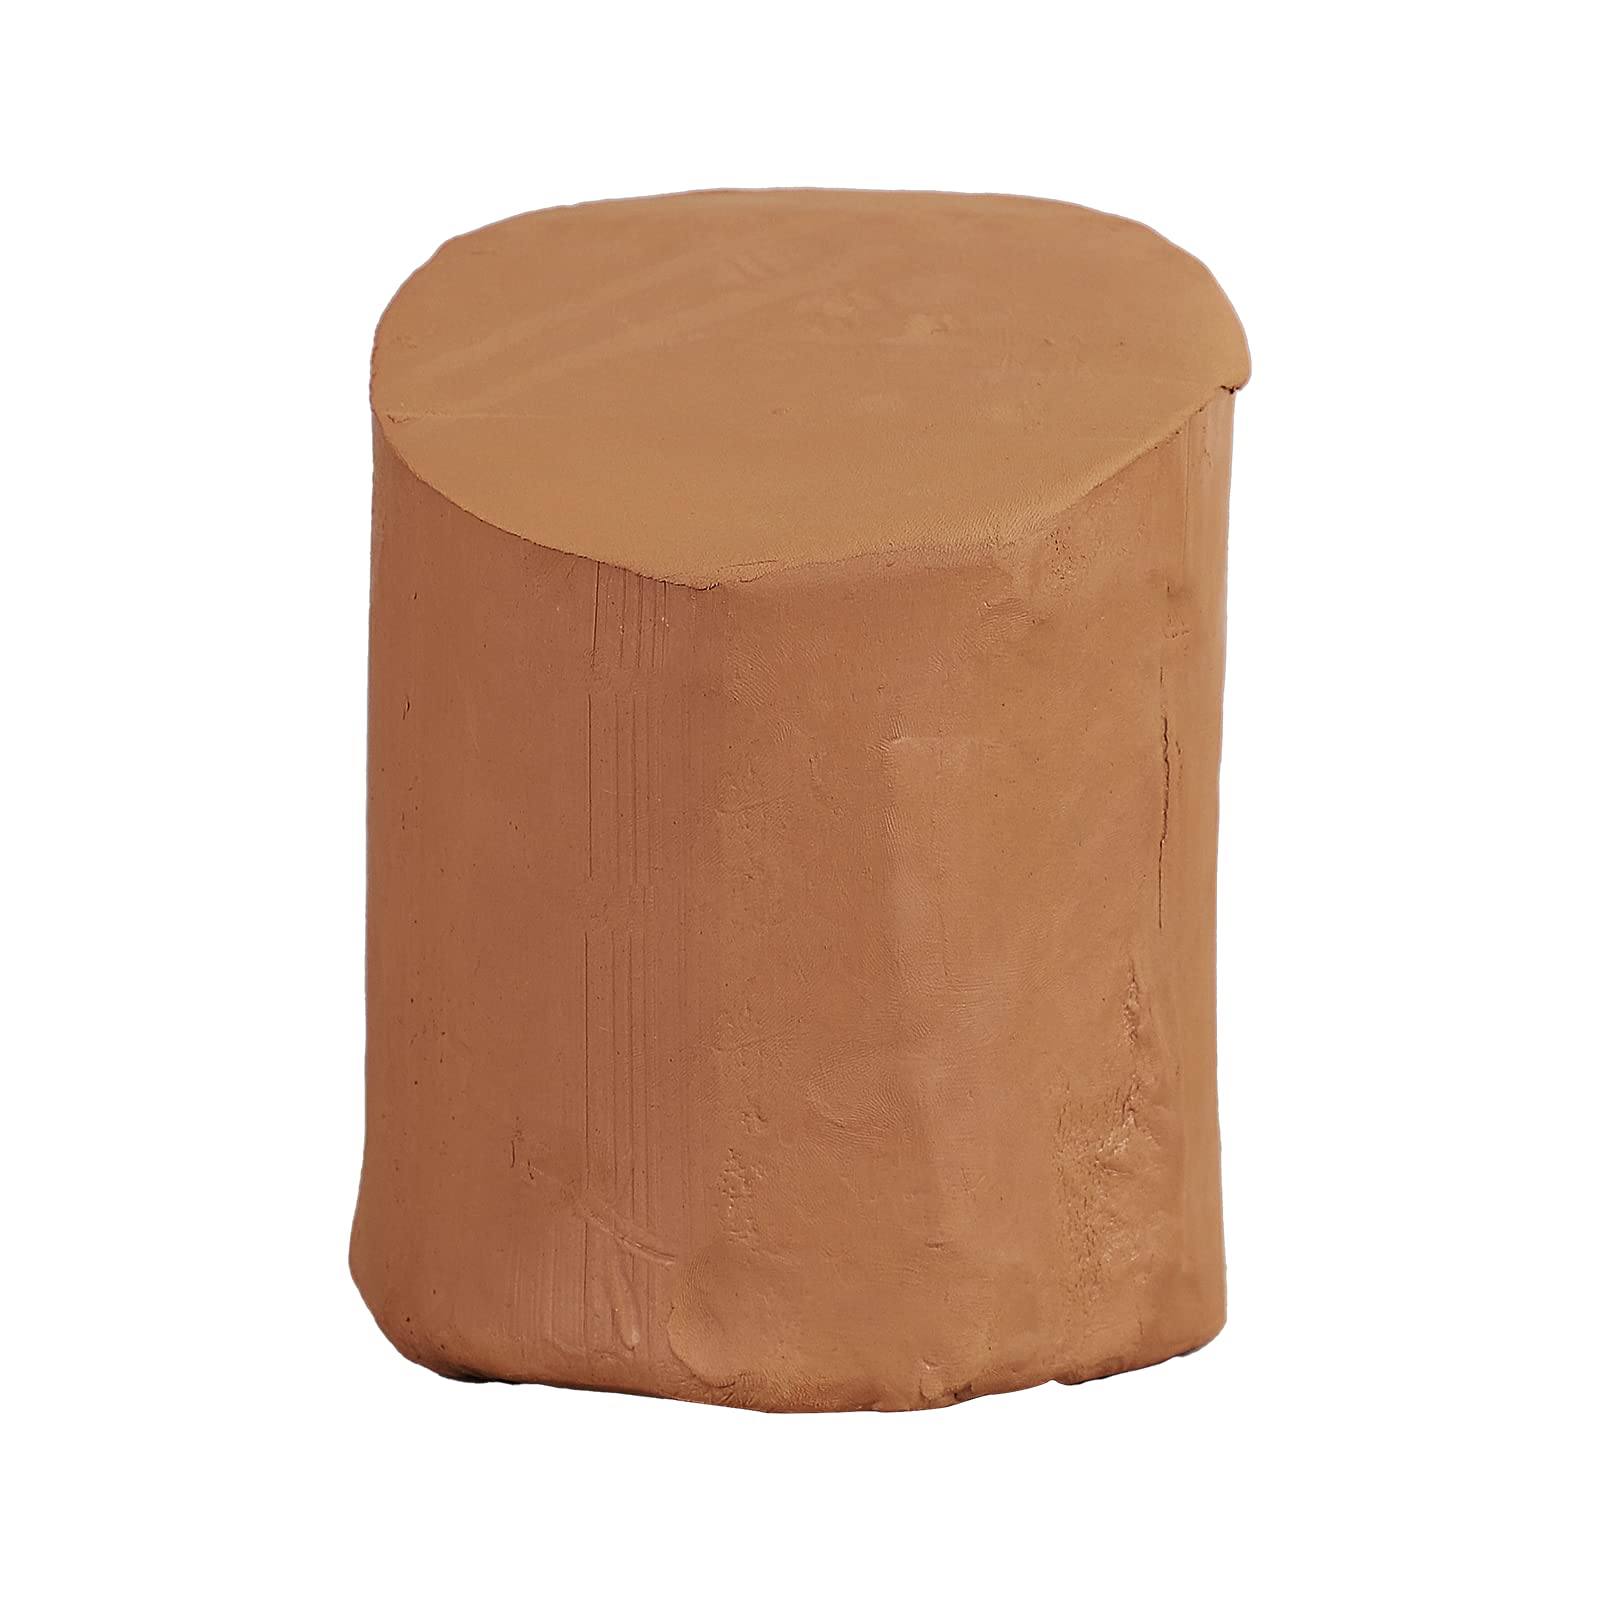 Bastex 5 lbs Low Fire Pottery Clay - Terra Cotta, Cone 06. Earthware Potters Throwing Clay. Moist De-Aired Clay for Sculpting, Throwing, Firing and